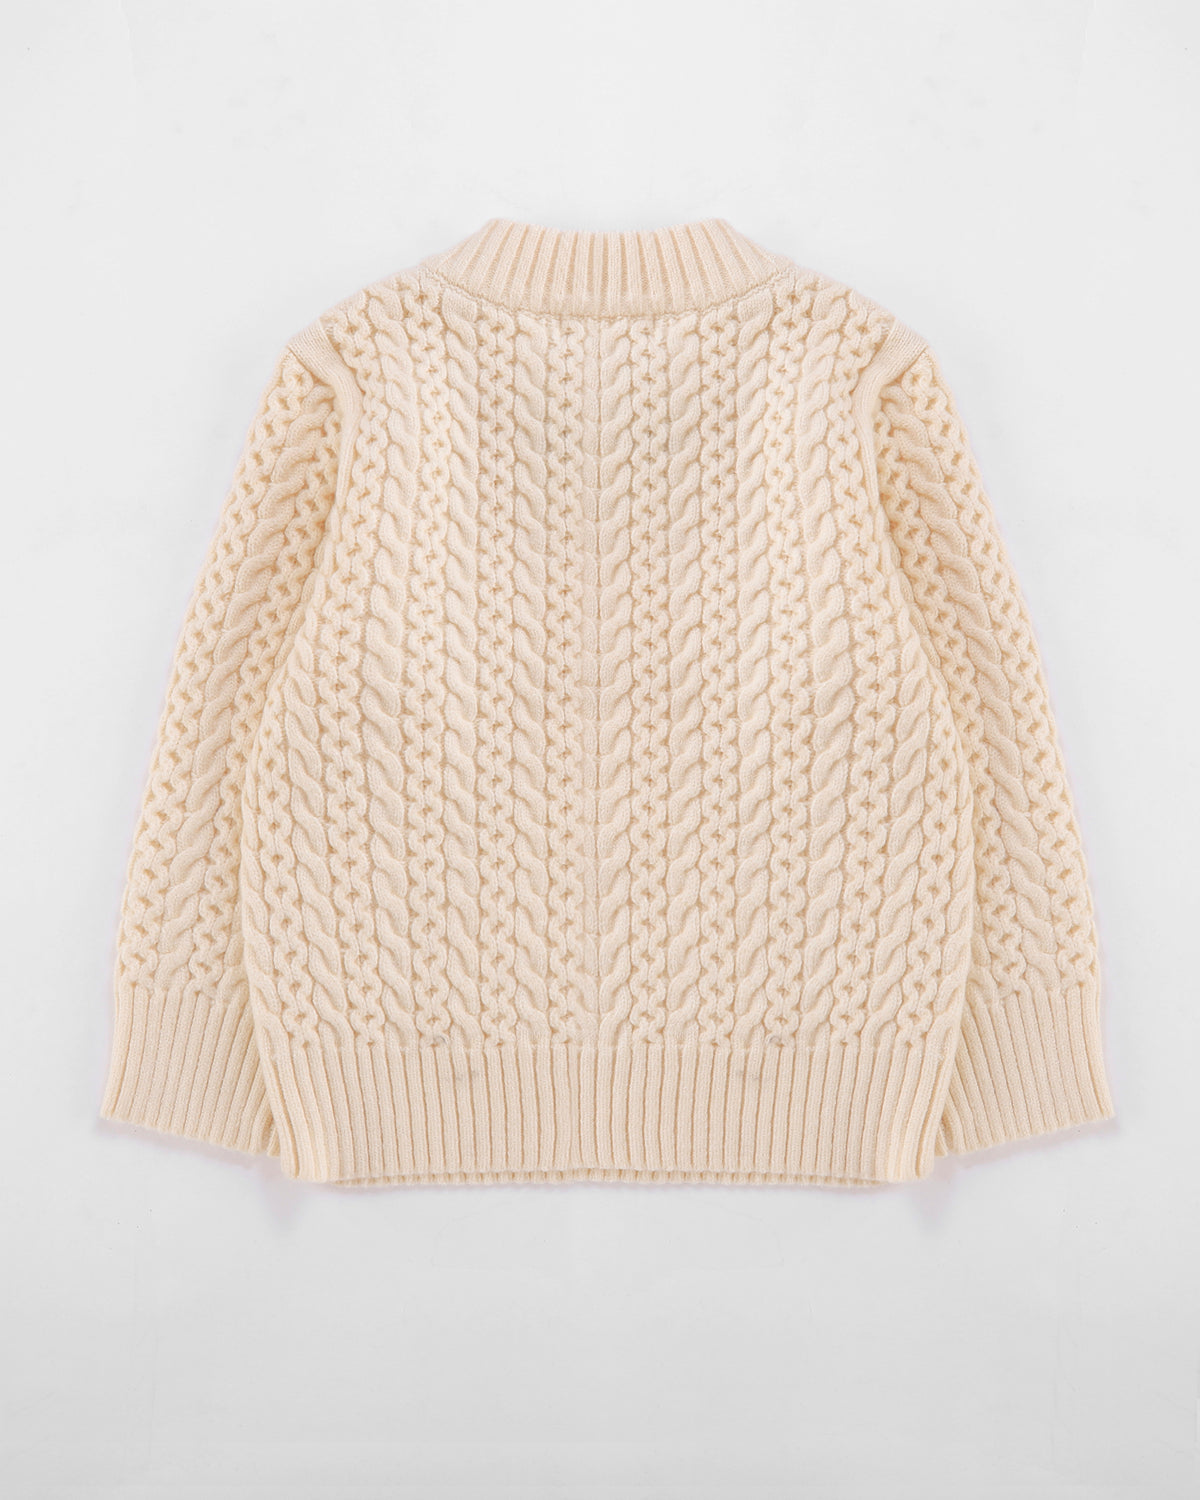 Crew Cable Knit Jumper in Cream Back